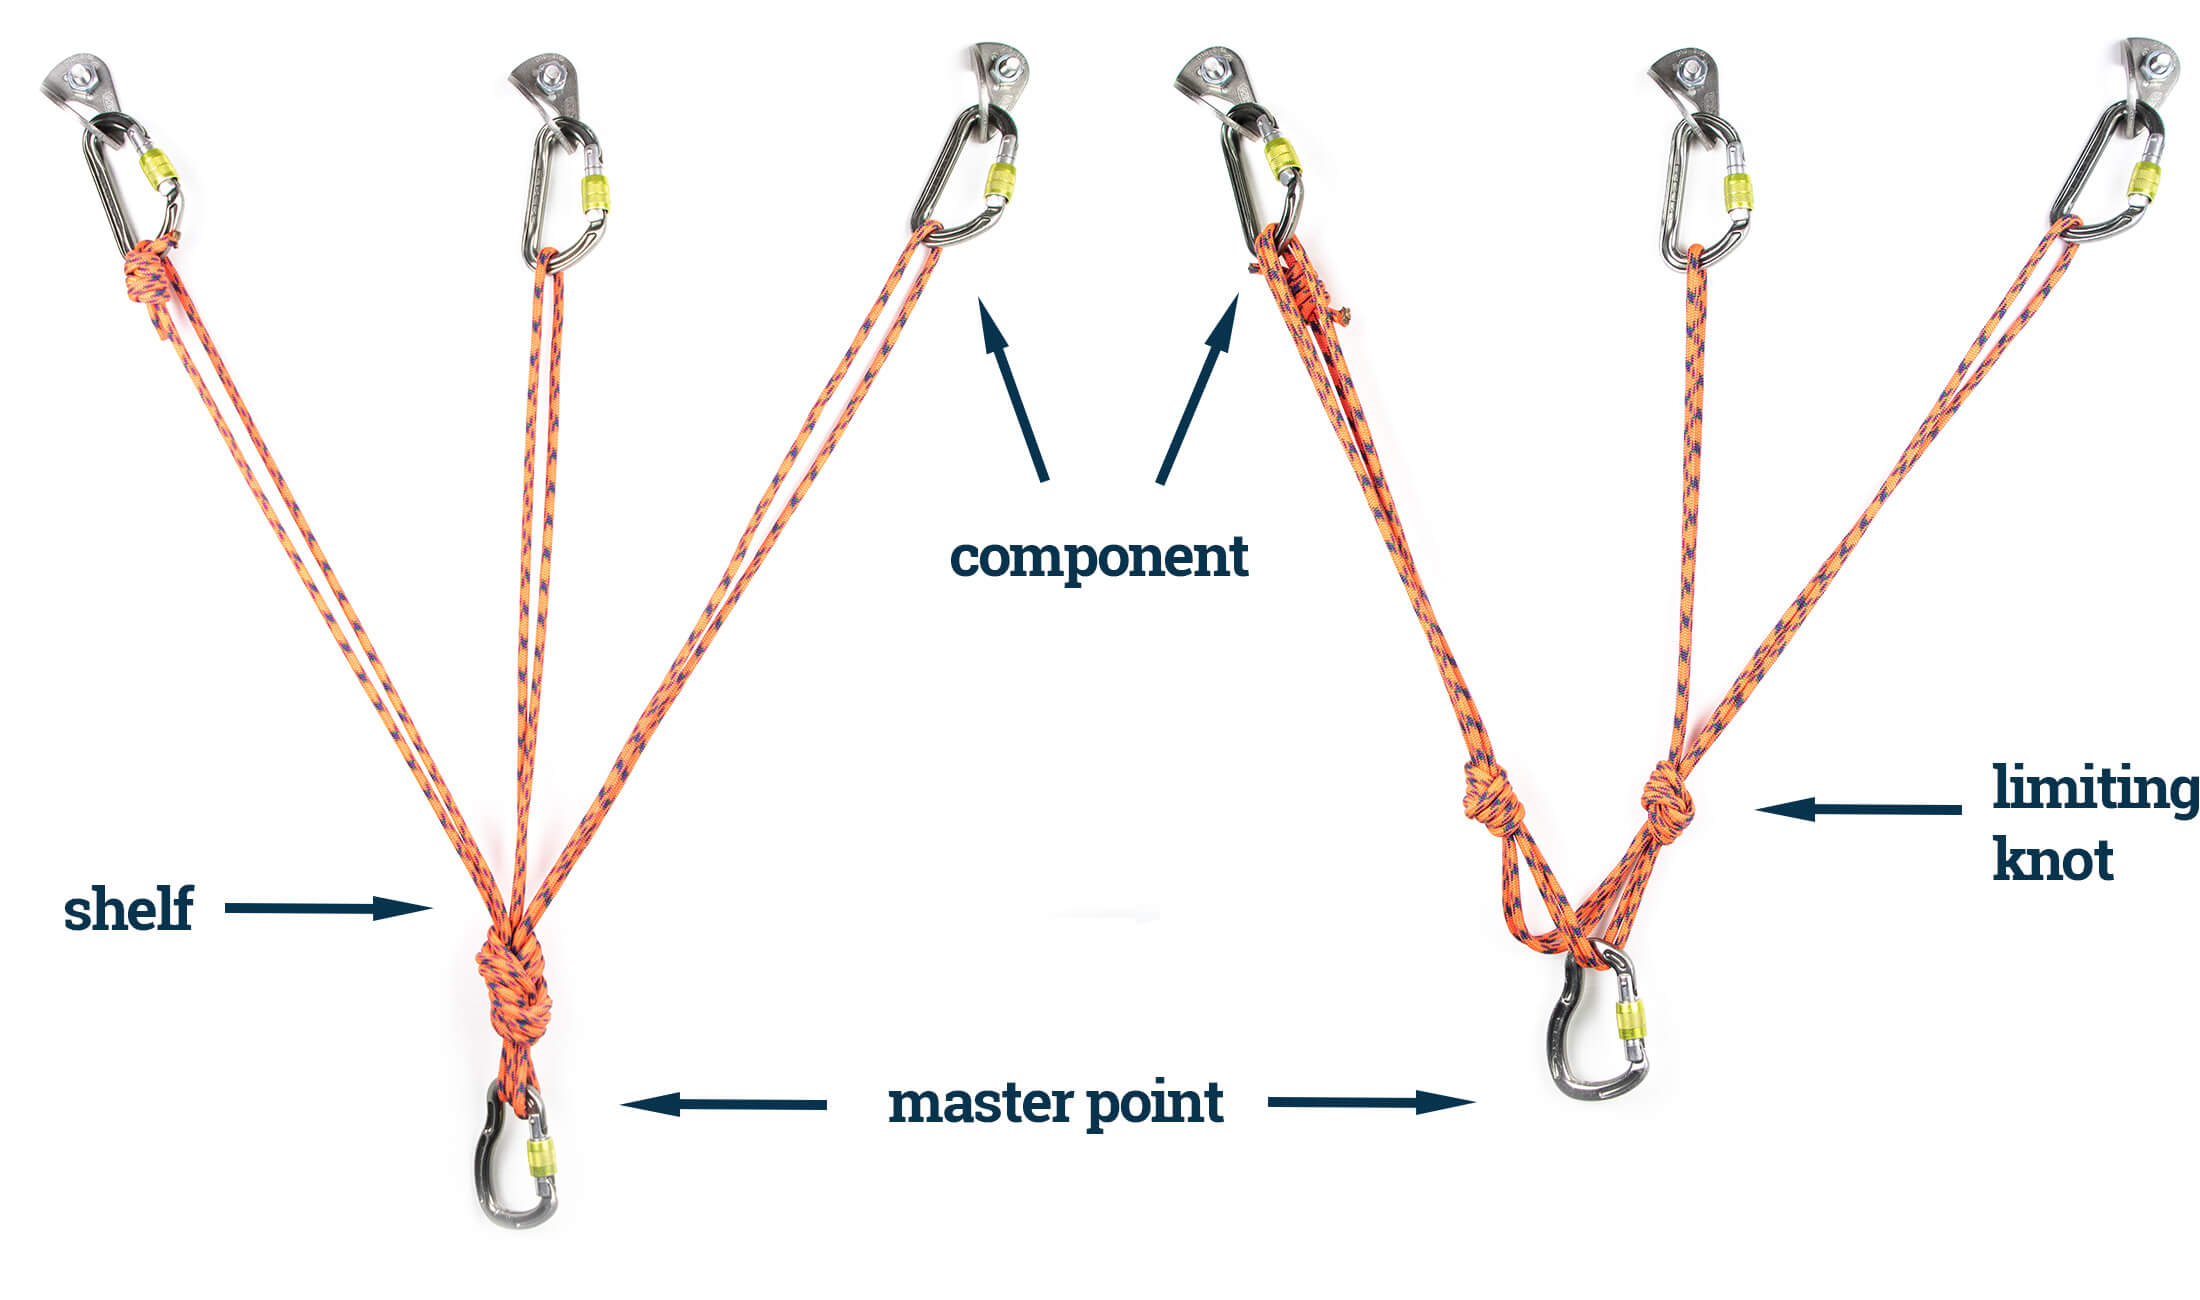 parts of a belay anchor